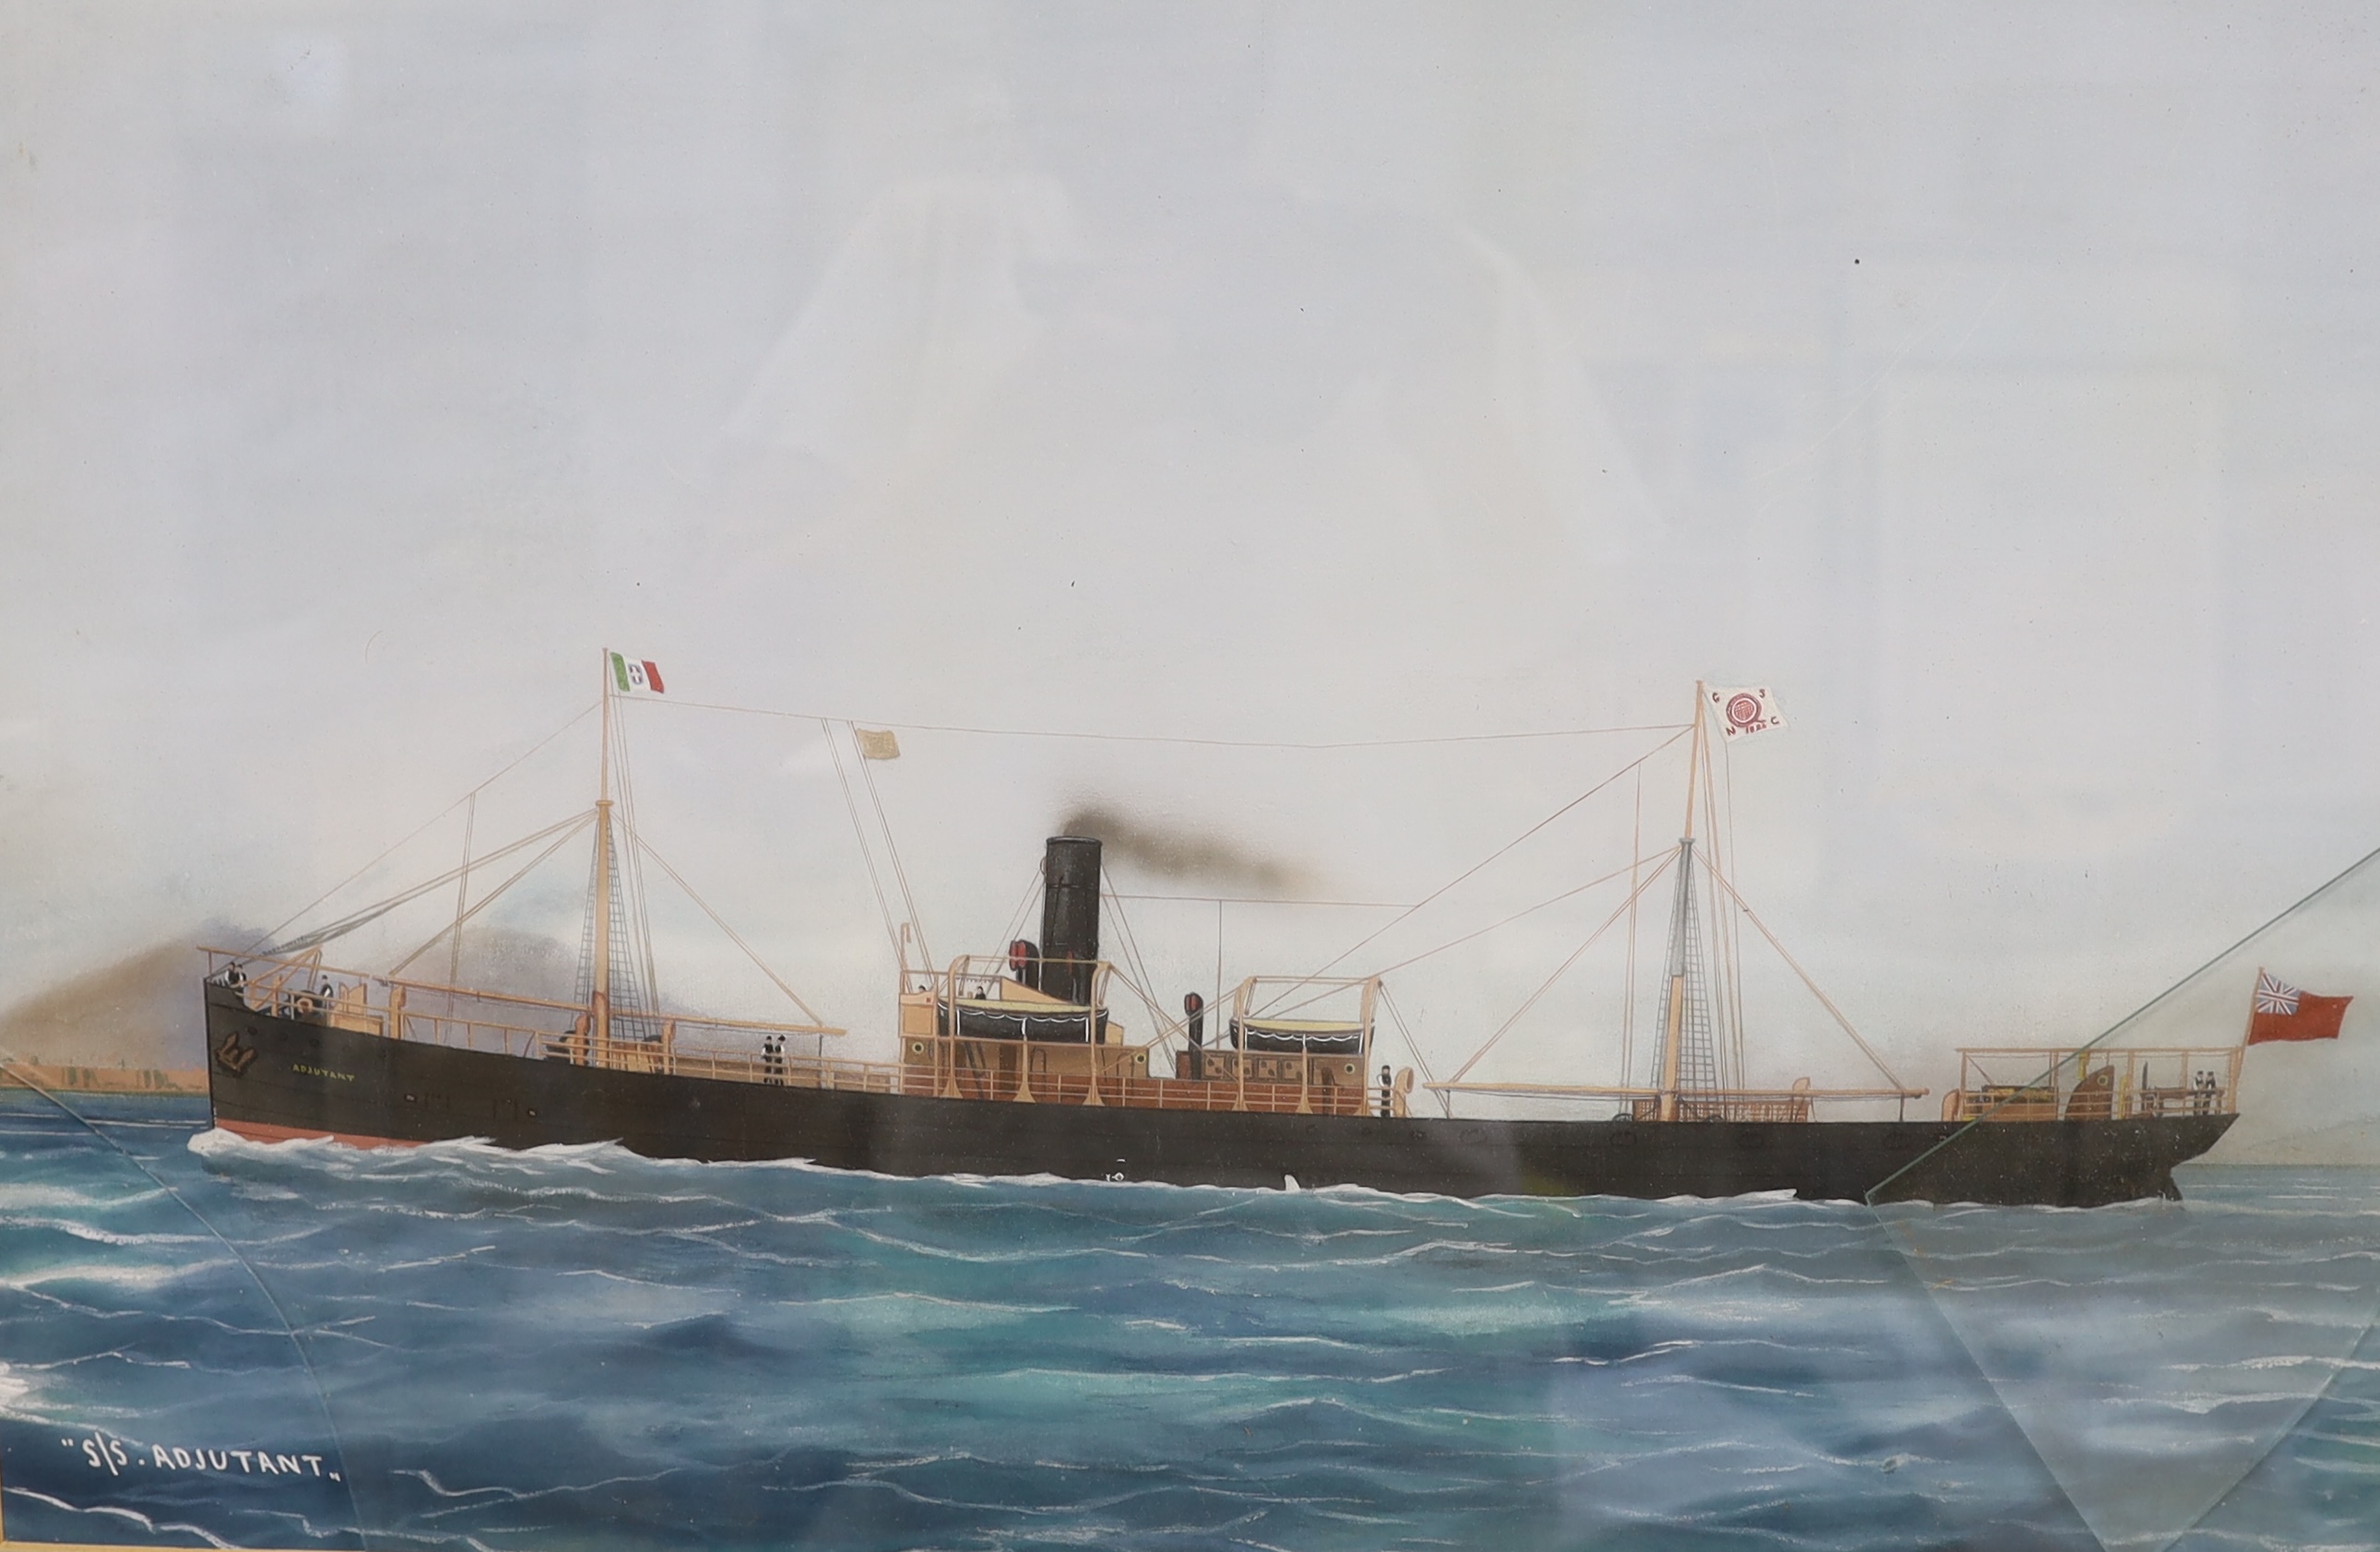 Neapolitan School, c.1900, gouache, The Steamship Adjutant, Great Northern Steamship Co., 41 x 63cm. Condition - poor, discolouration to the paper, glass broken